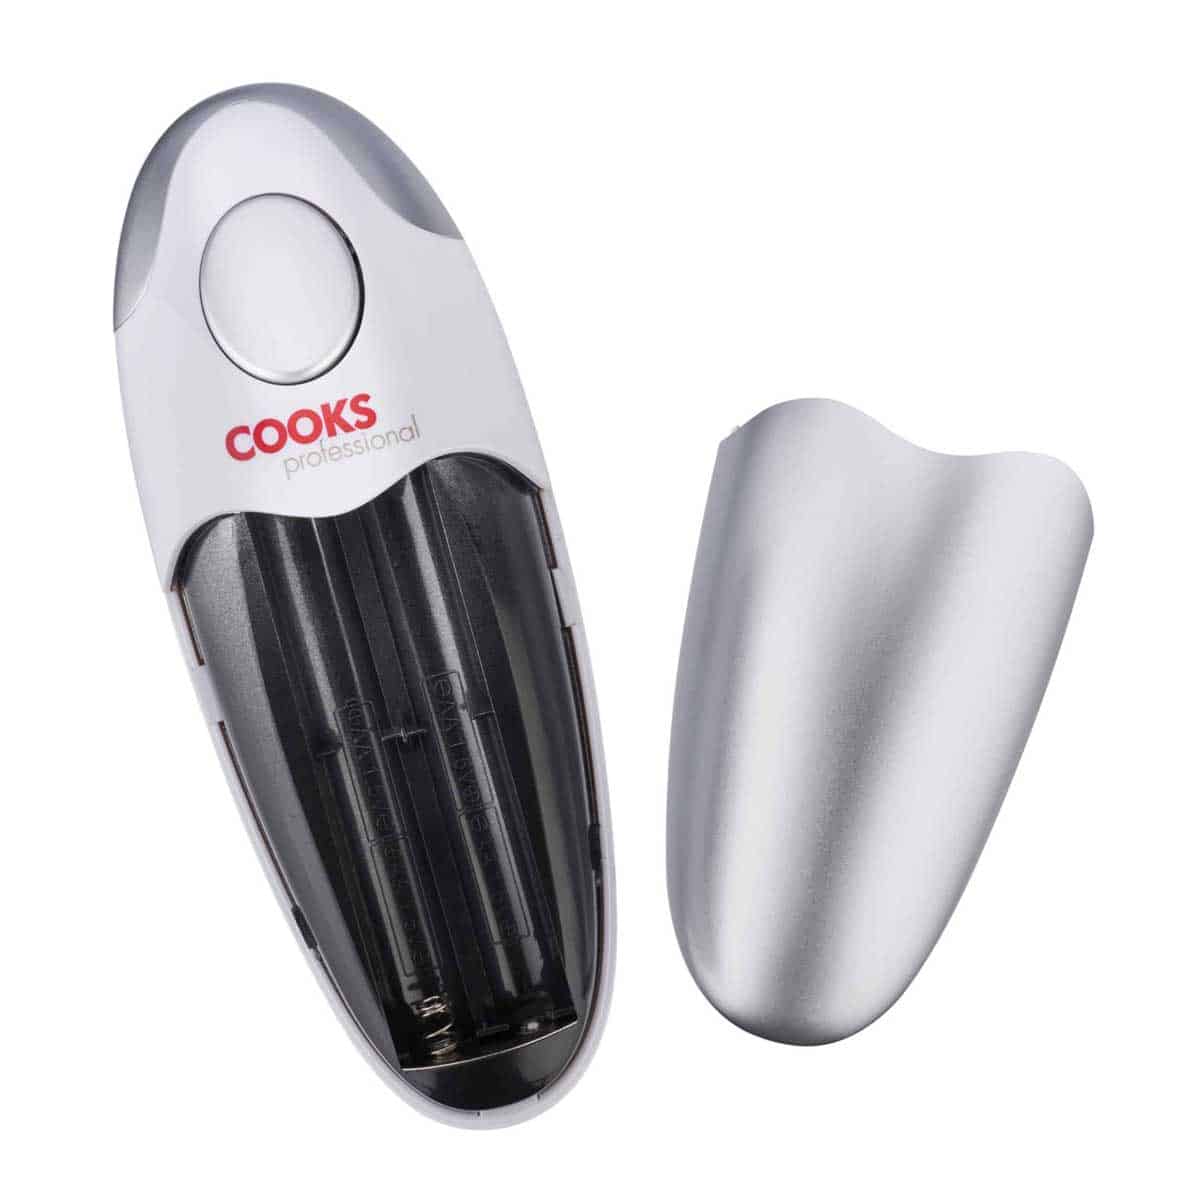 Cooks Professional Electric Tin Can Opener Automatic One Touch